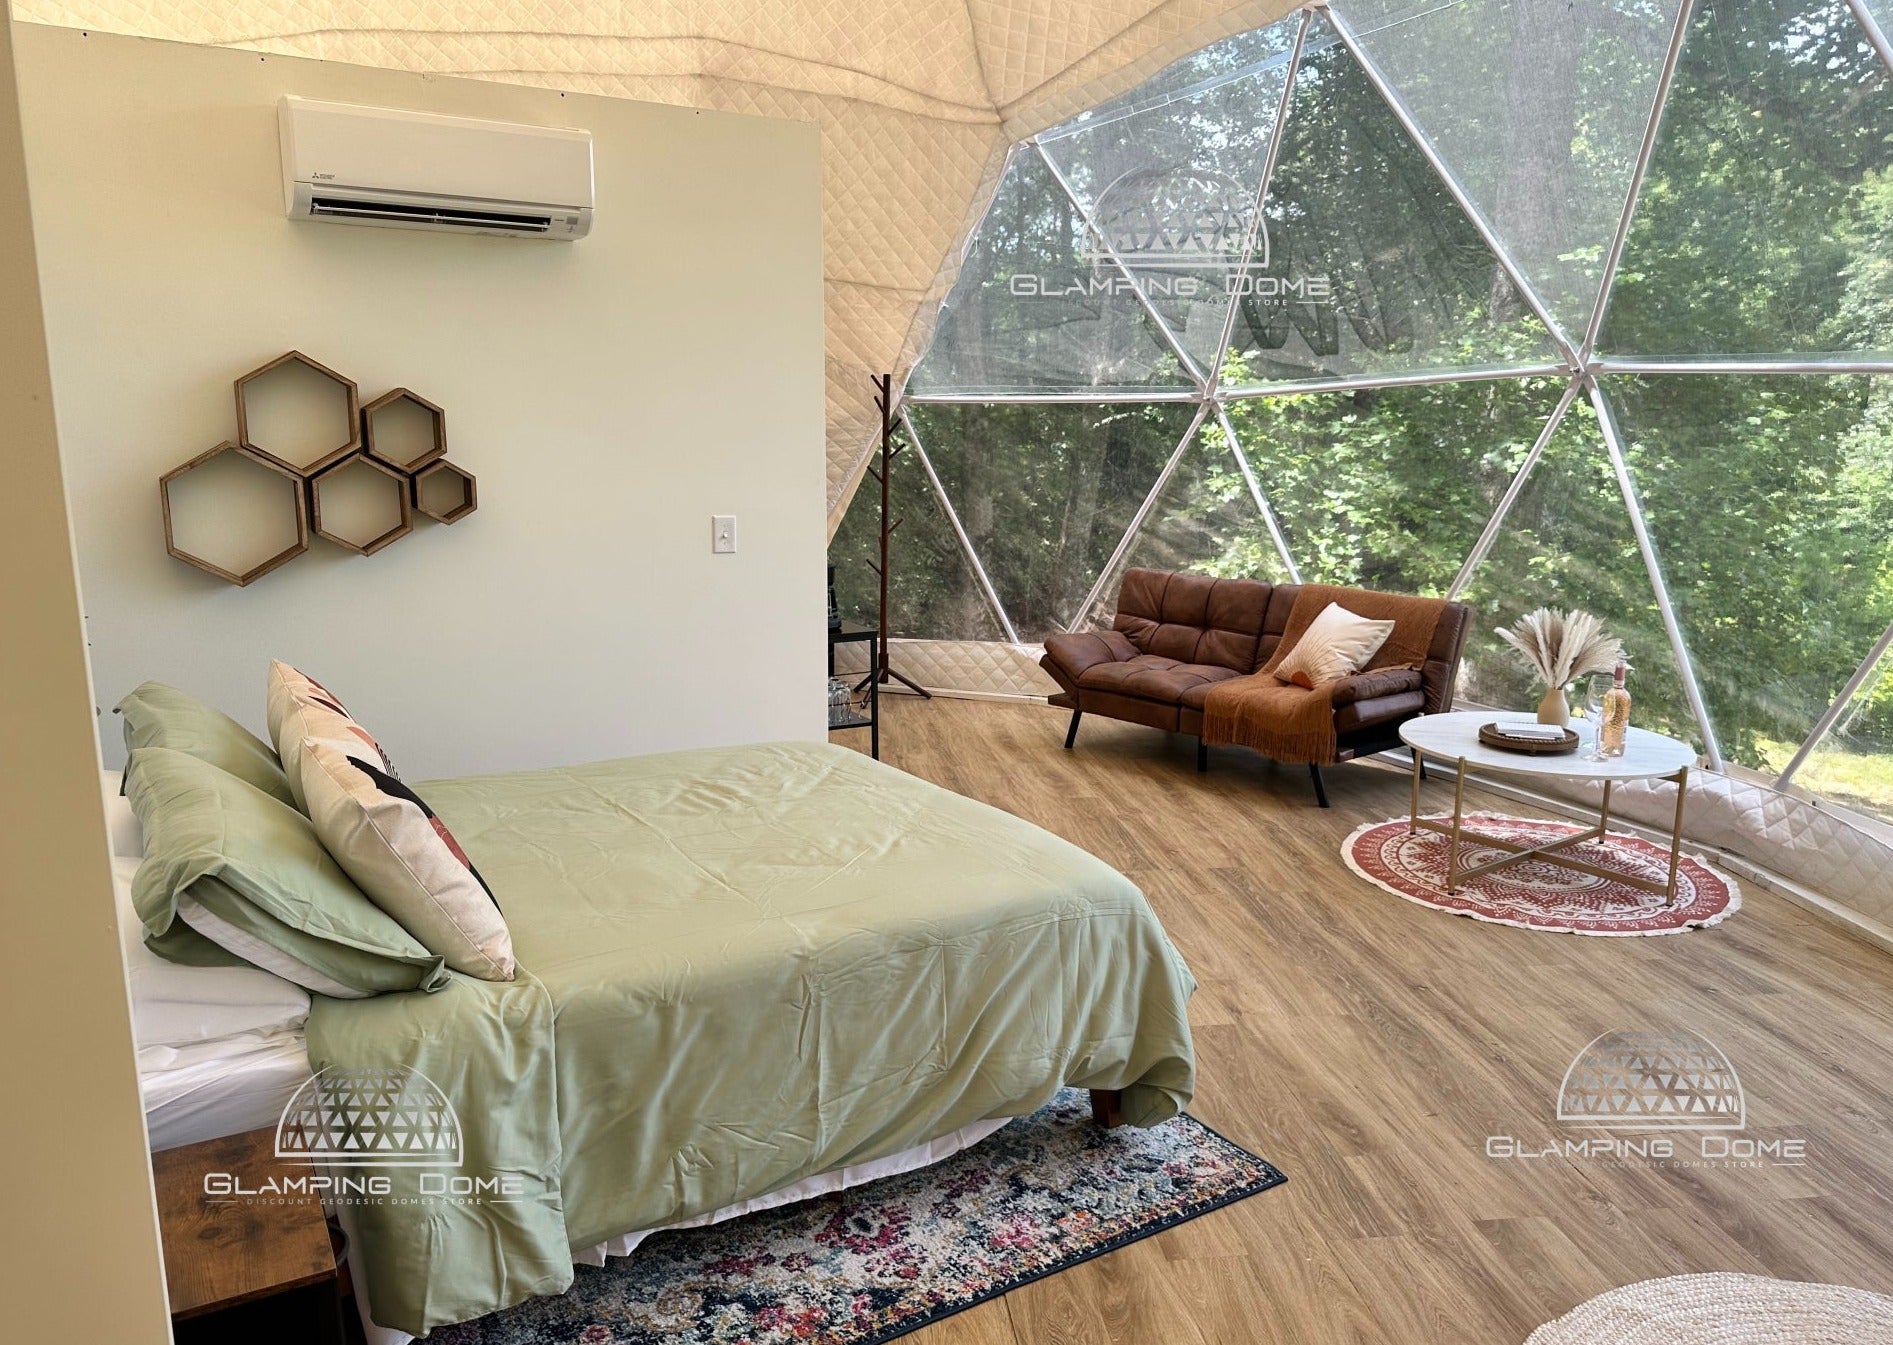 queen size bed and panoramic window in the 29.5ft diameter glamping dome